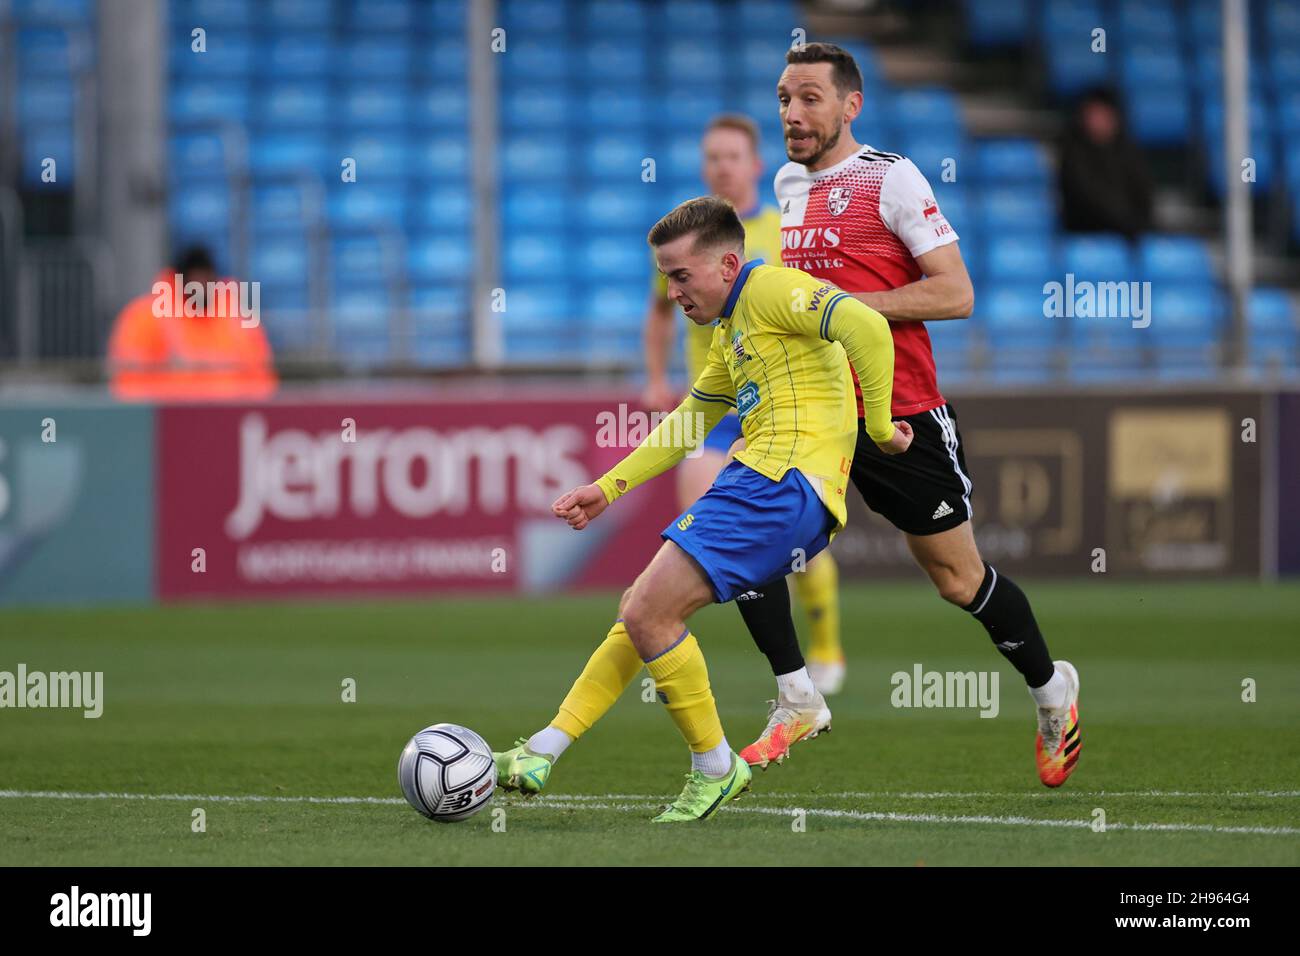 SOLIHULL, ENGLAND. DECEMBER 4TH 2021. Joe Sbarra of Solihull Moors shoots at goal during the Vanarama National League match between Solihull Moors and Woking FC at the Armco Stadium, Solihull on Saturday 4th December 2021. (Credit: James Holyoak/Alamy Live News) Stock Photo